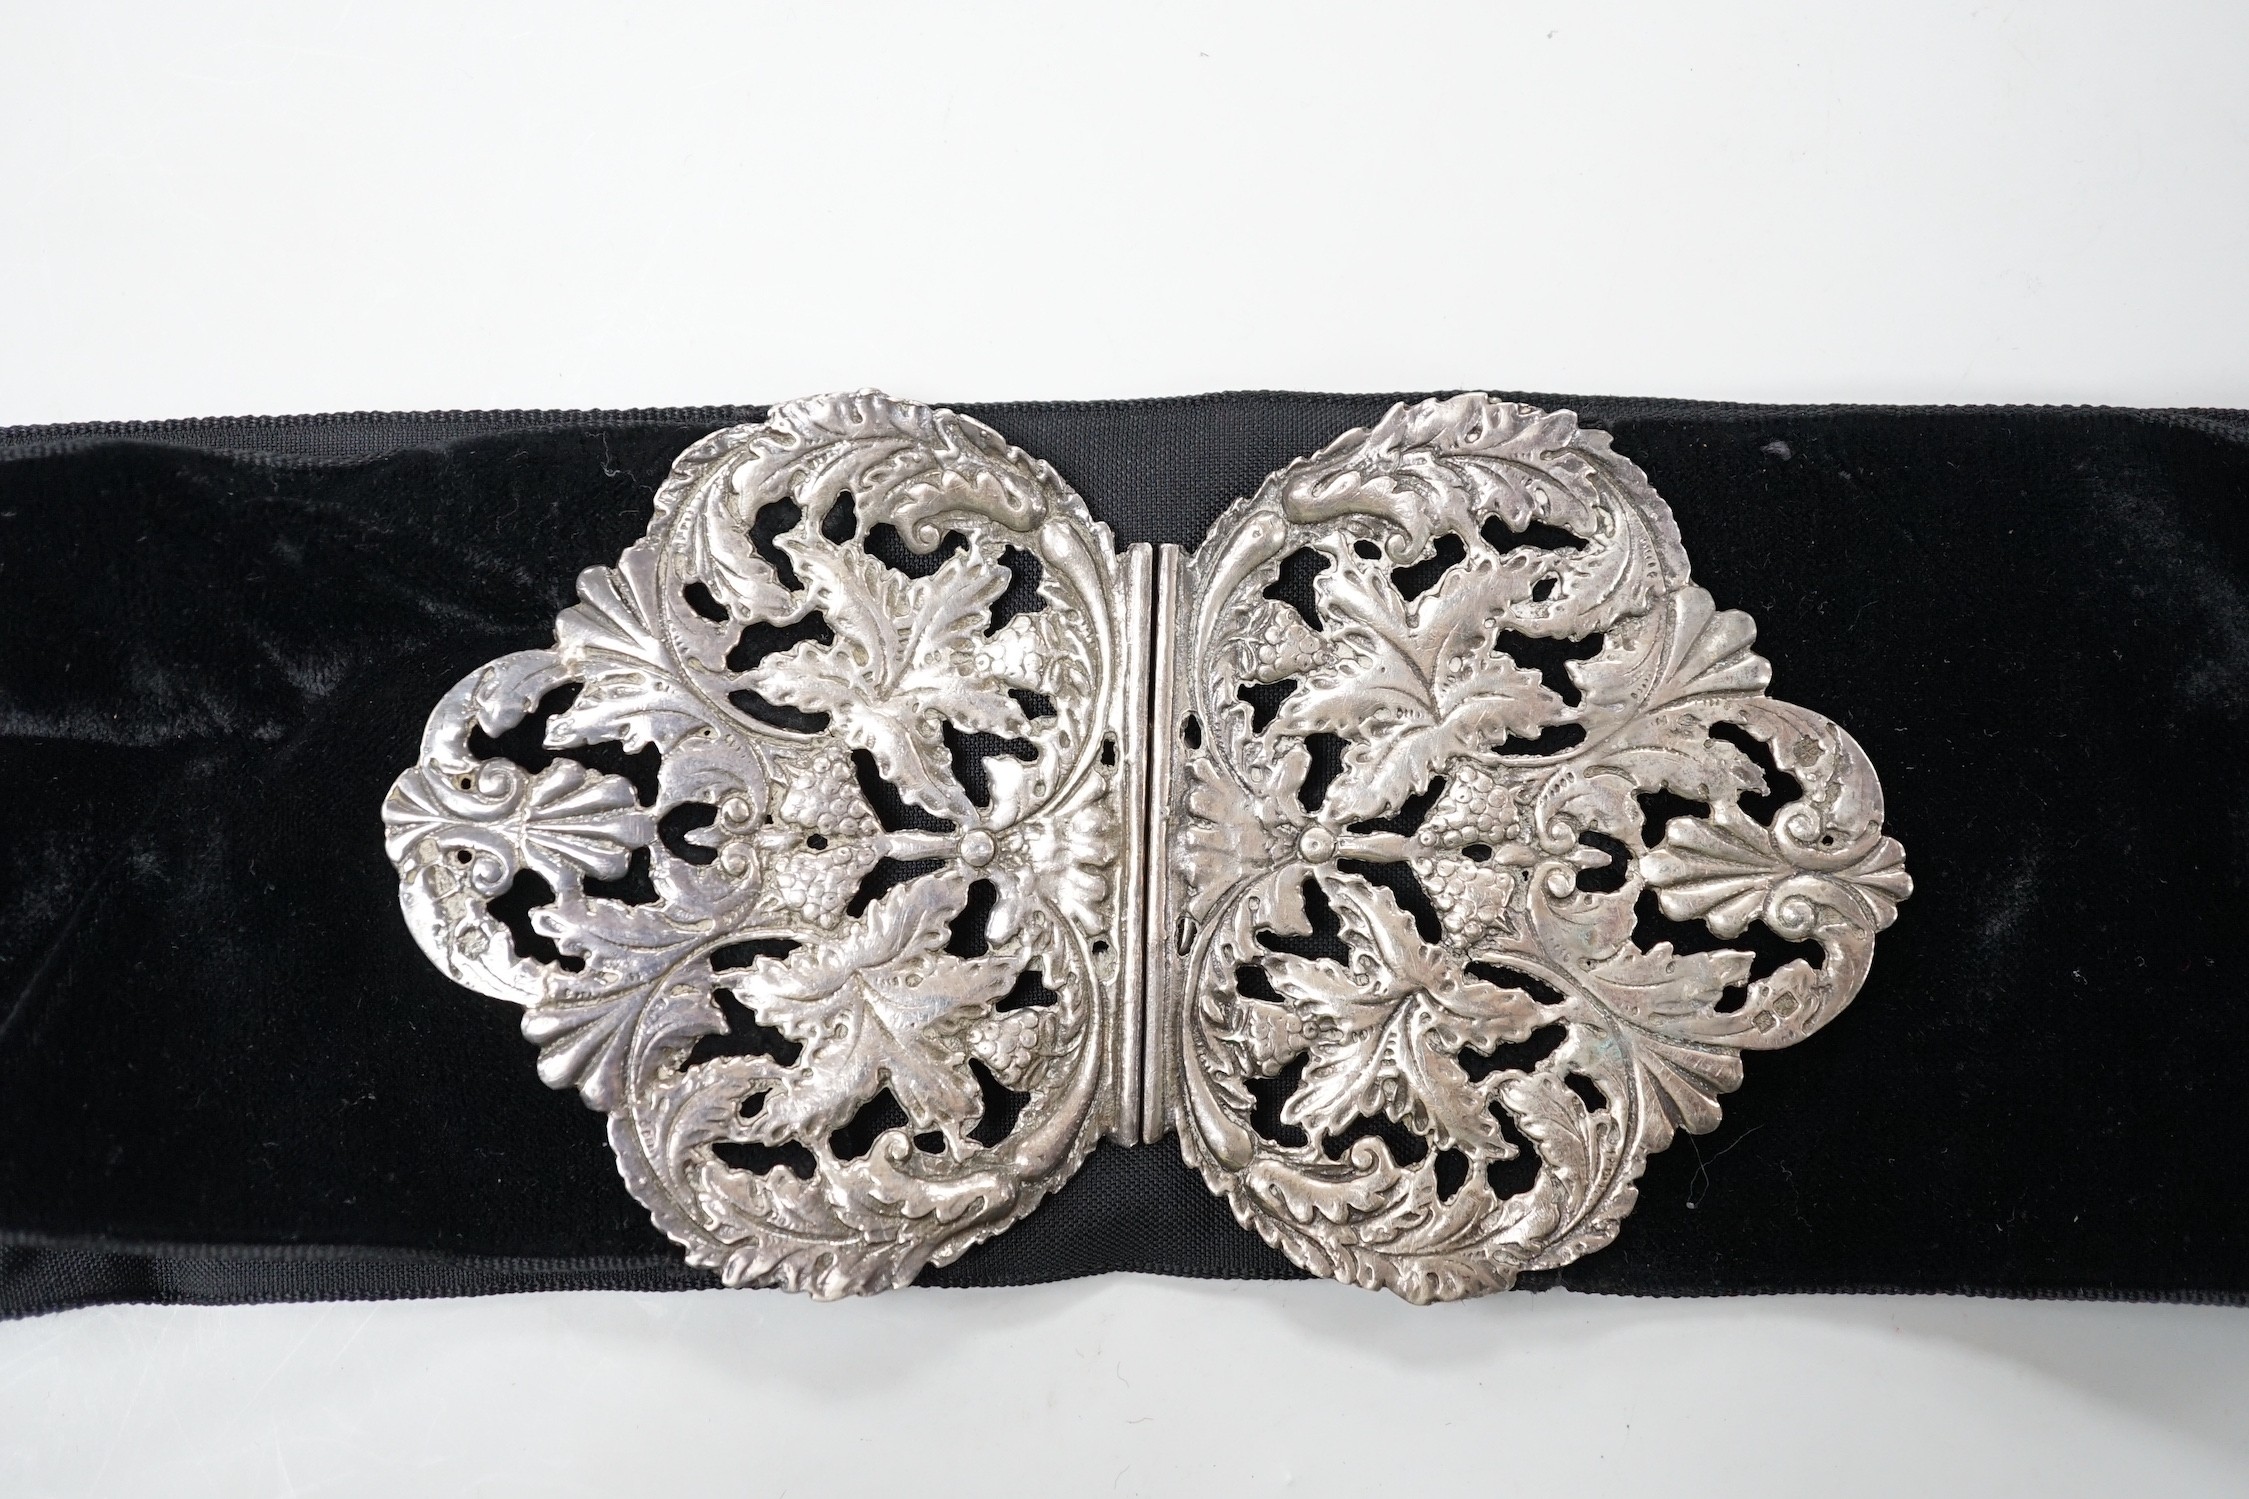 A late Victorian pierced silver belt buckle, on a black sash belt, James Deakin & Sons, Chester, - Image 2 of 3